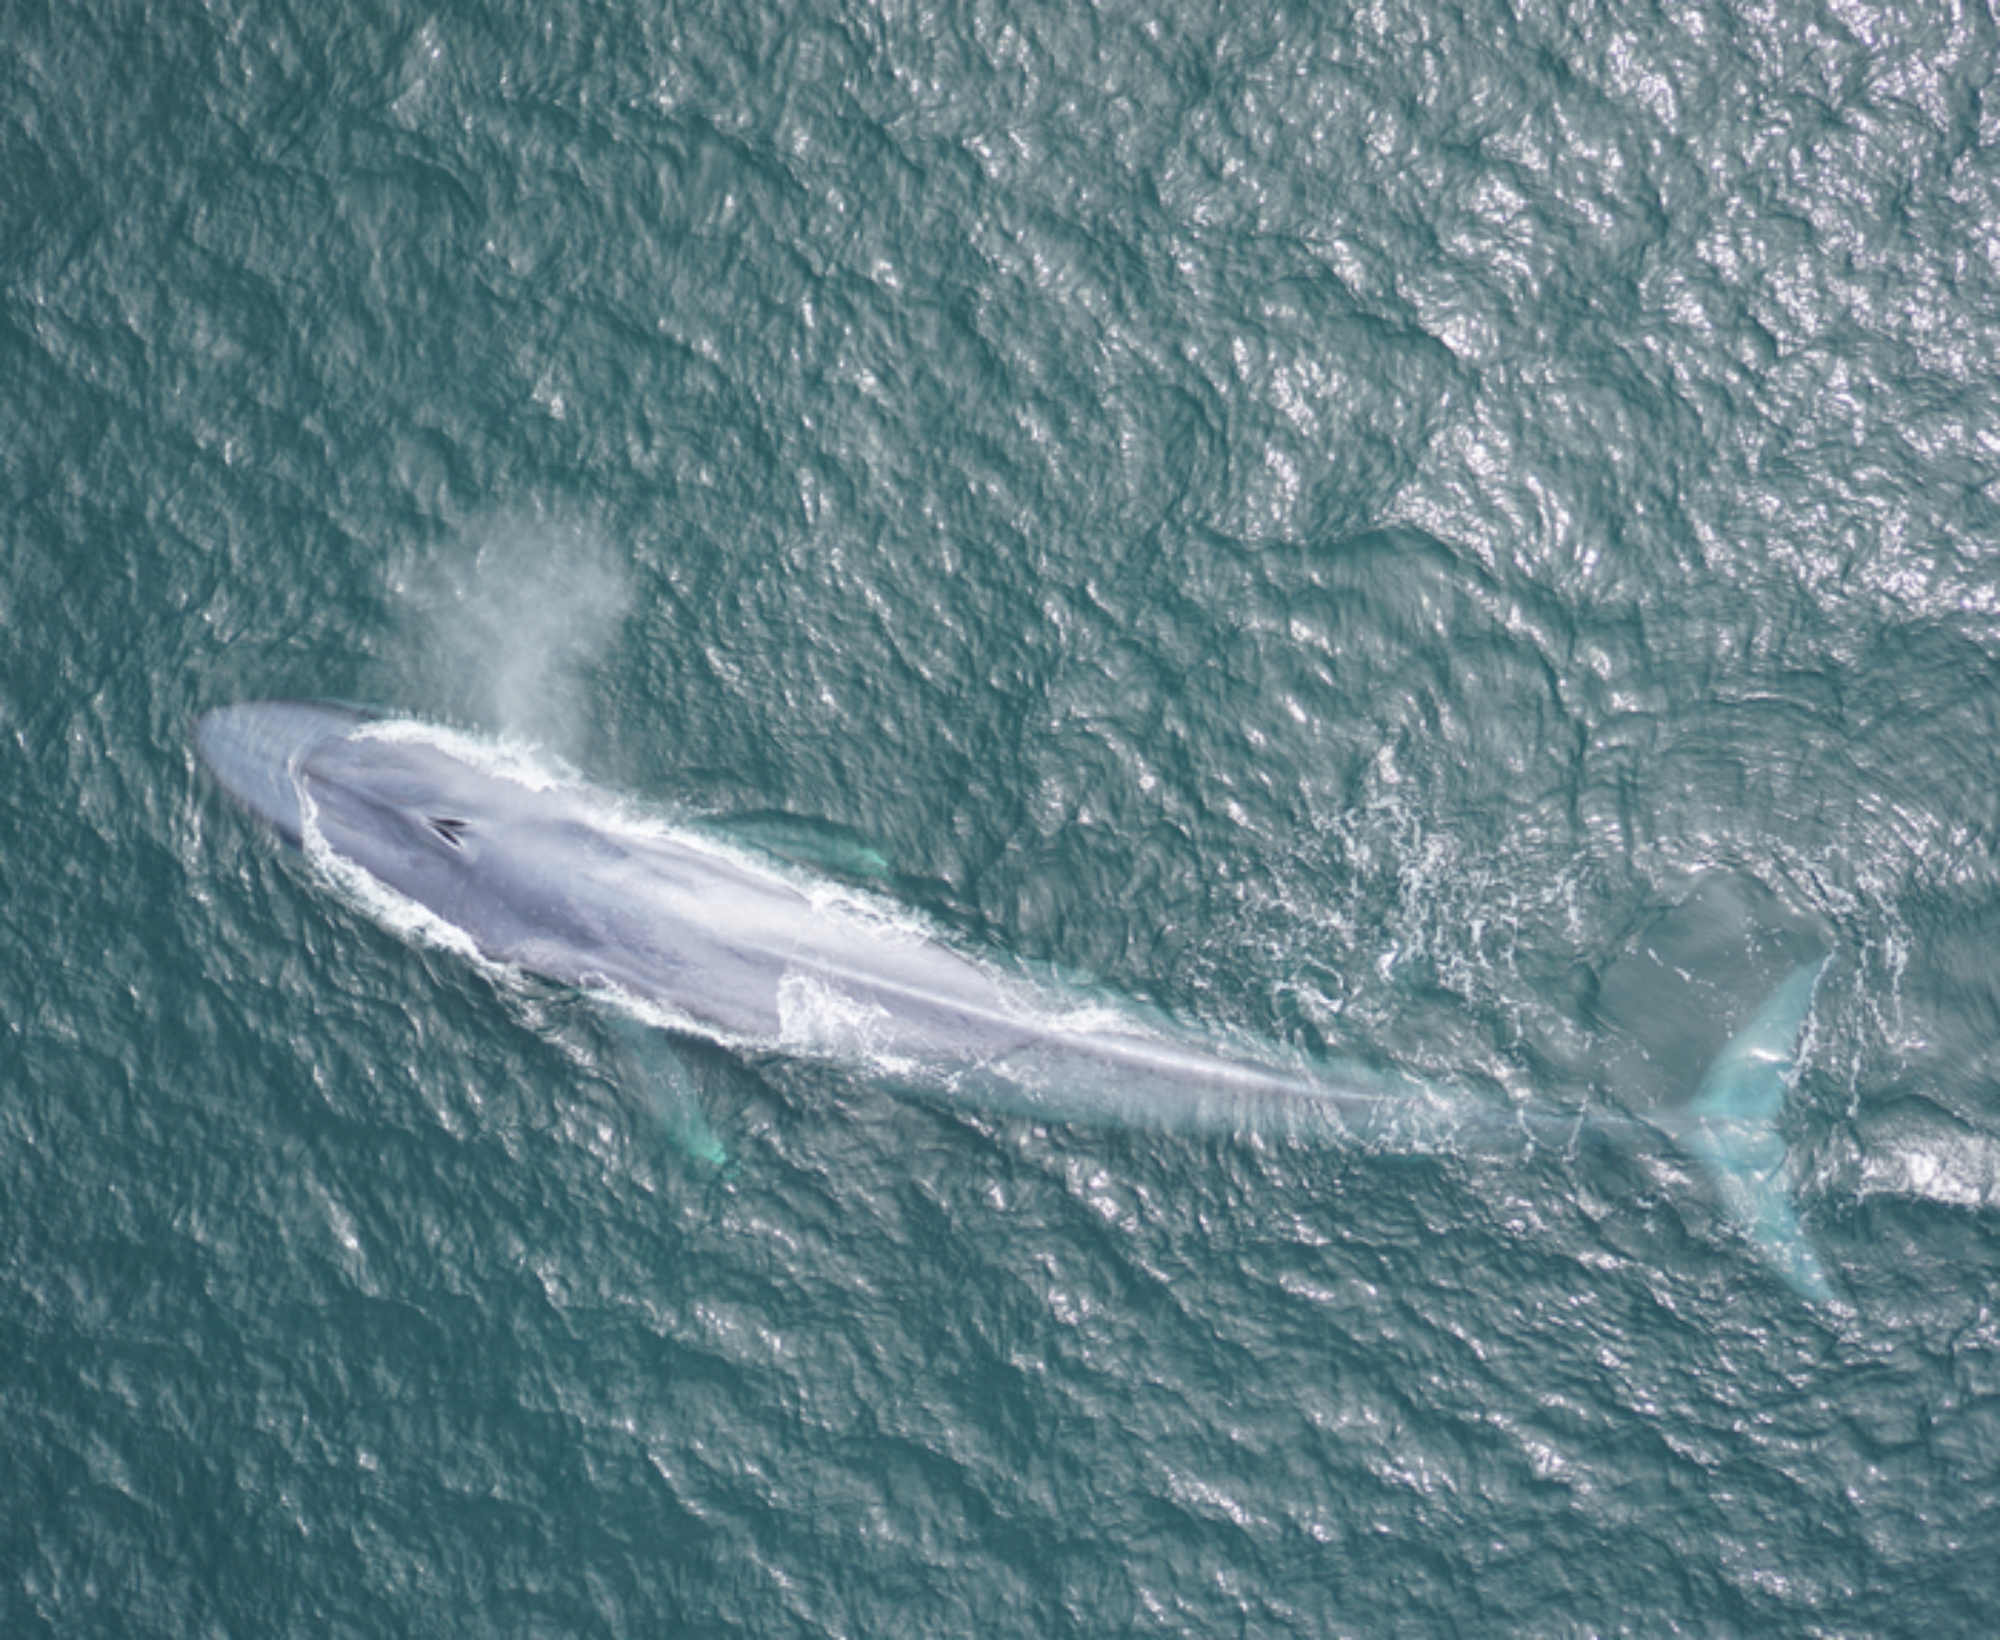 Blue whales track wind and water to hunt their meals | Popular Science